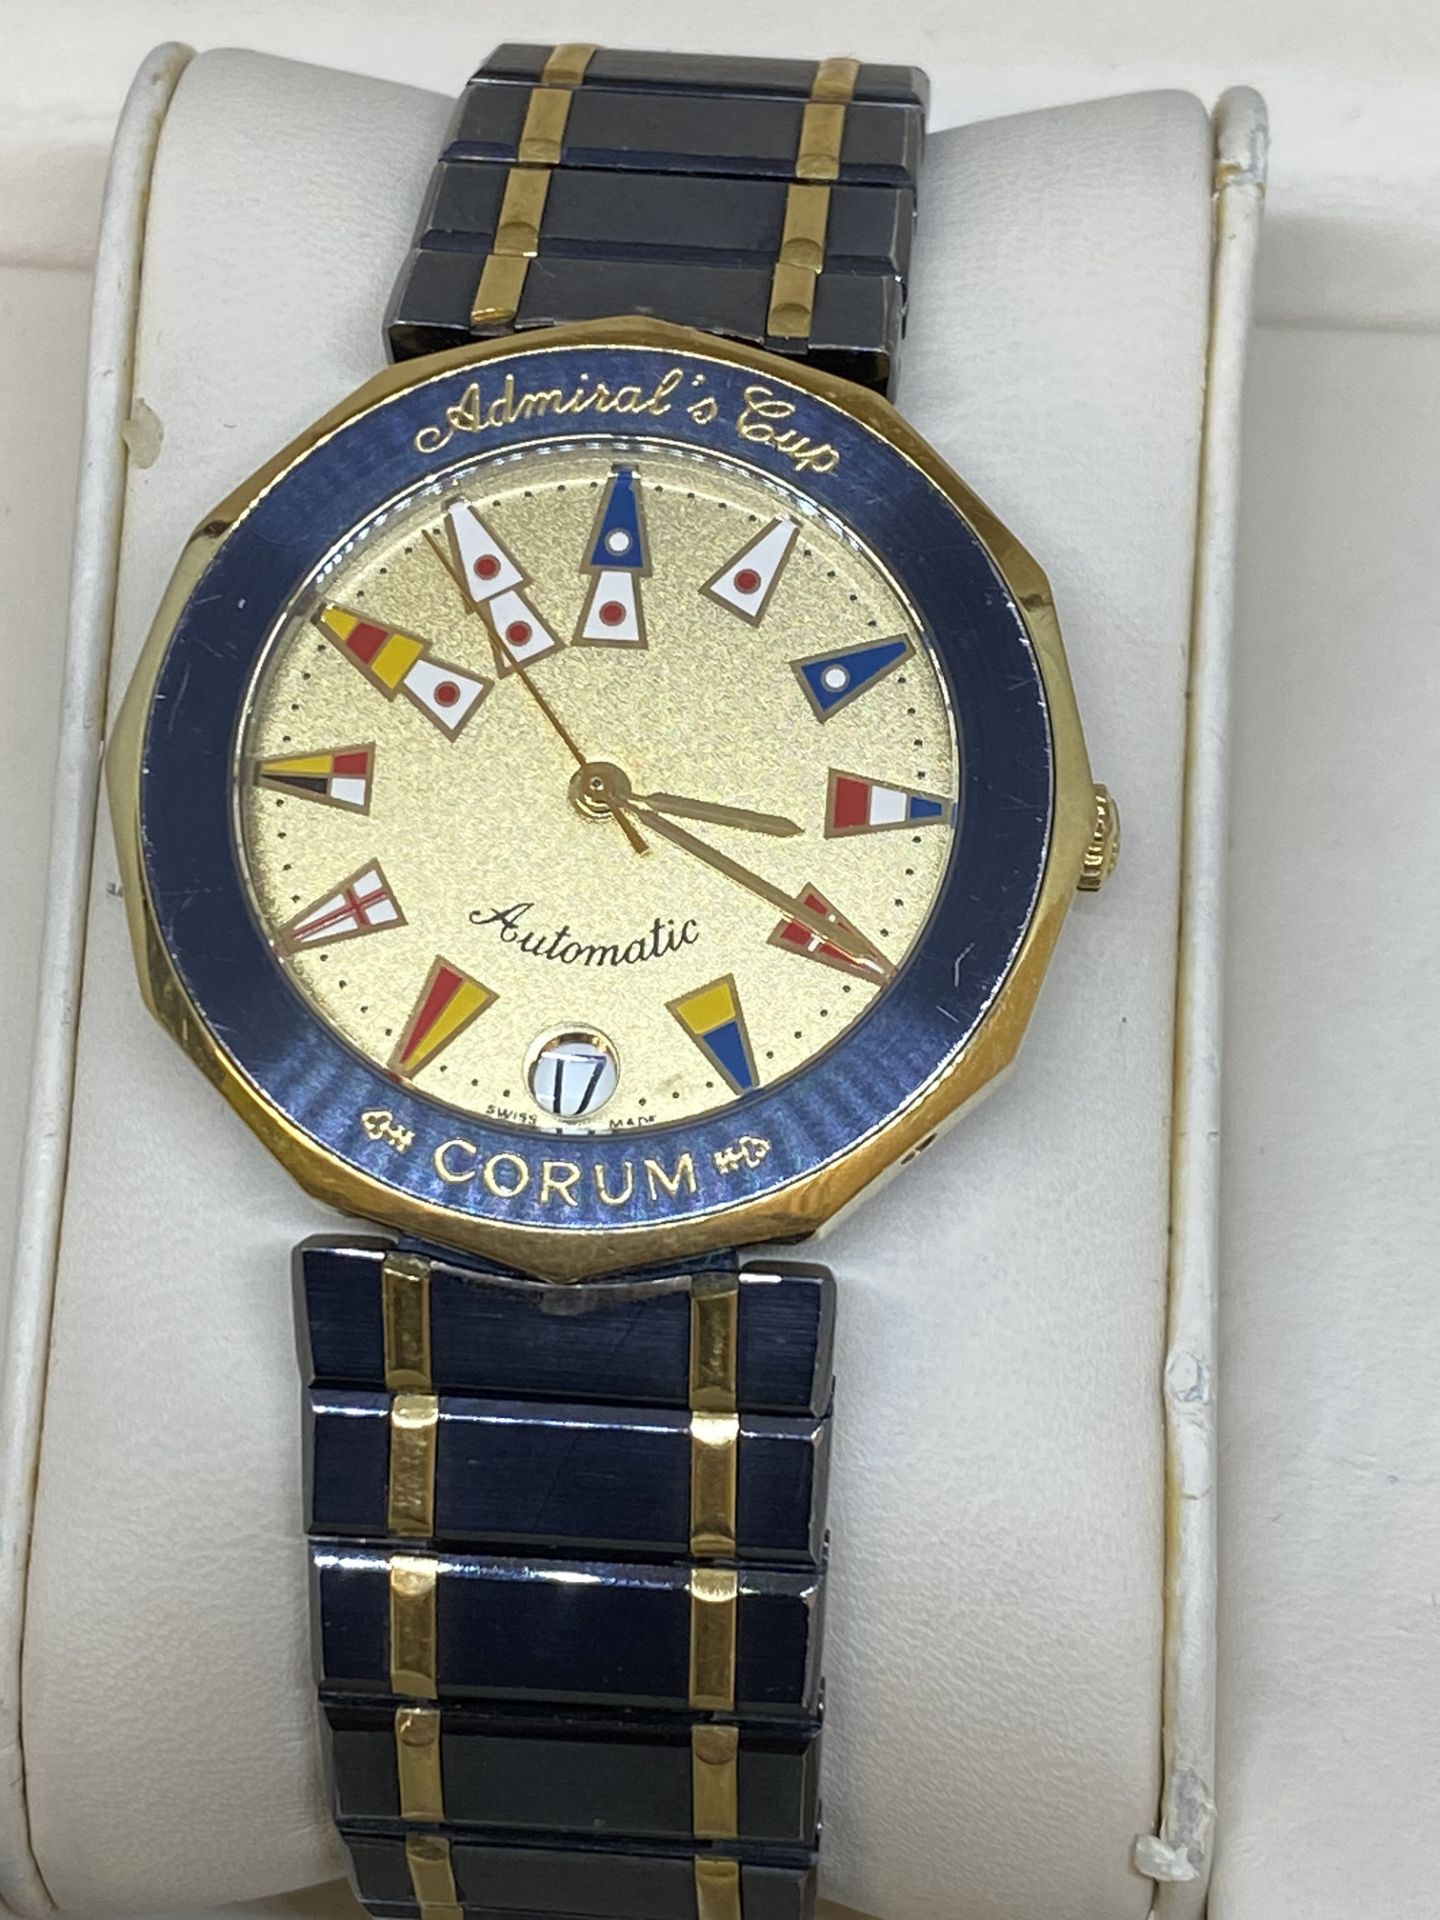 CORUM ADMIRALS CUP 18ct GOLD & S/STEEL AUTOMATIC WATCH